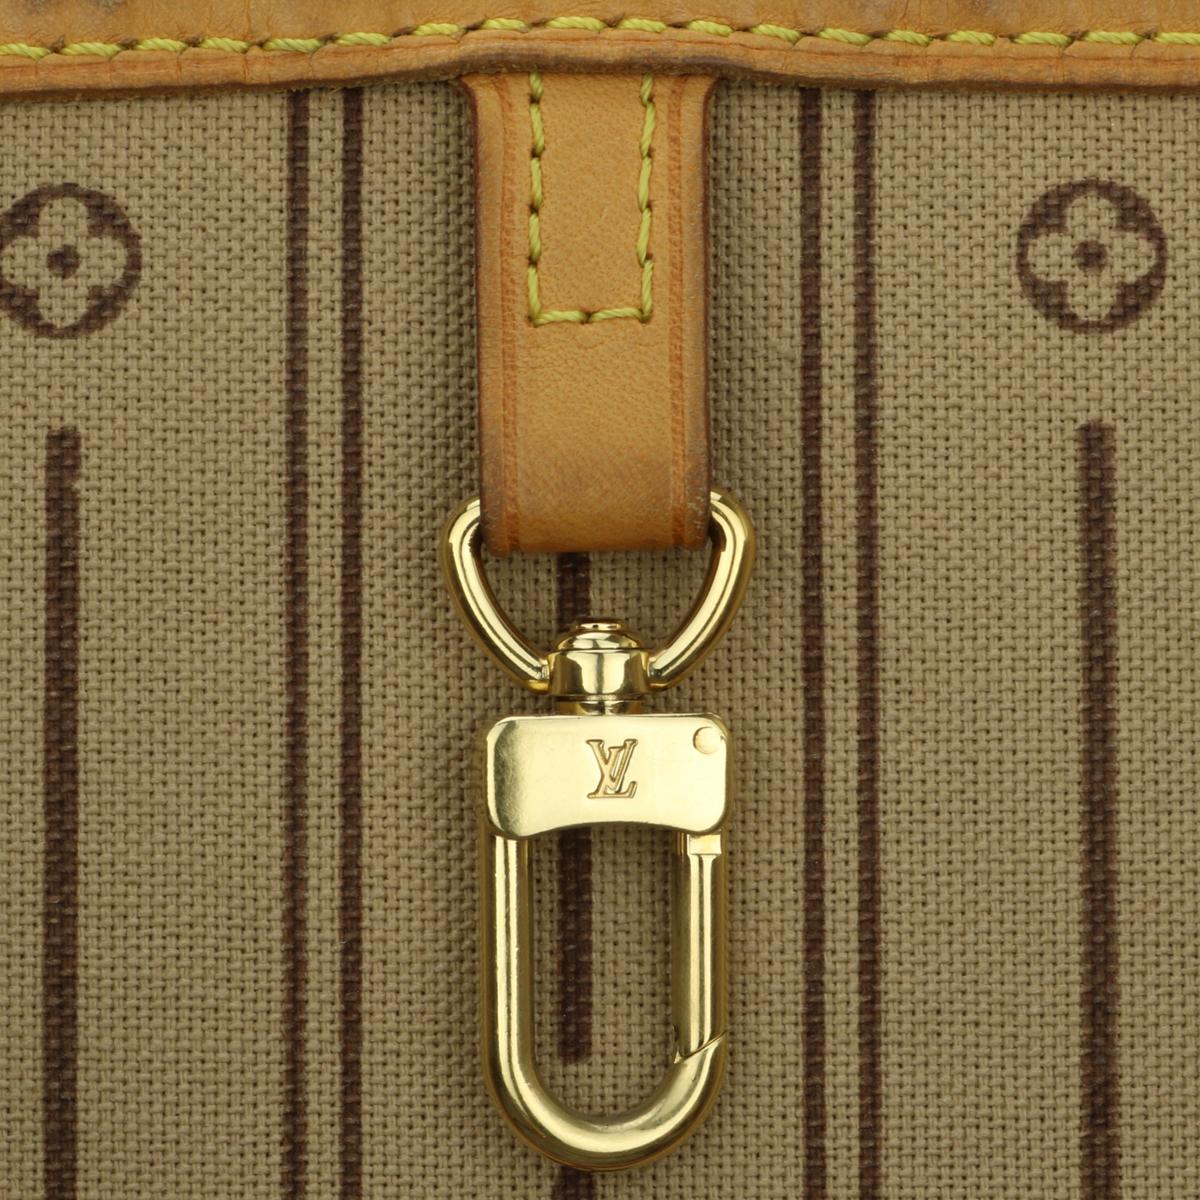 Louis Vuitton Neverfull GM Bag in Monogram with Beige Interior 2008 11